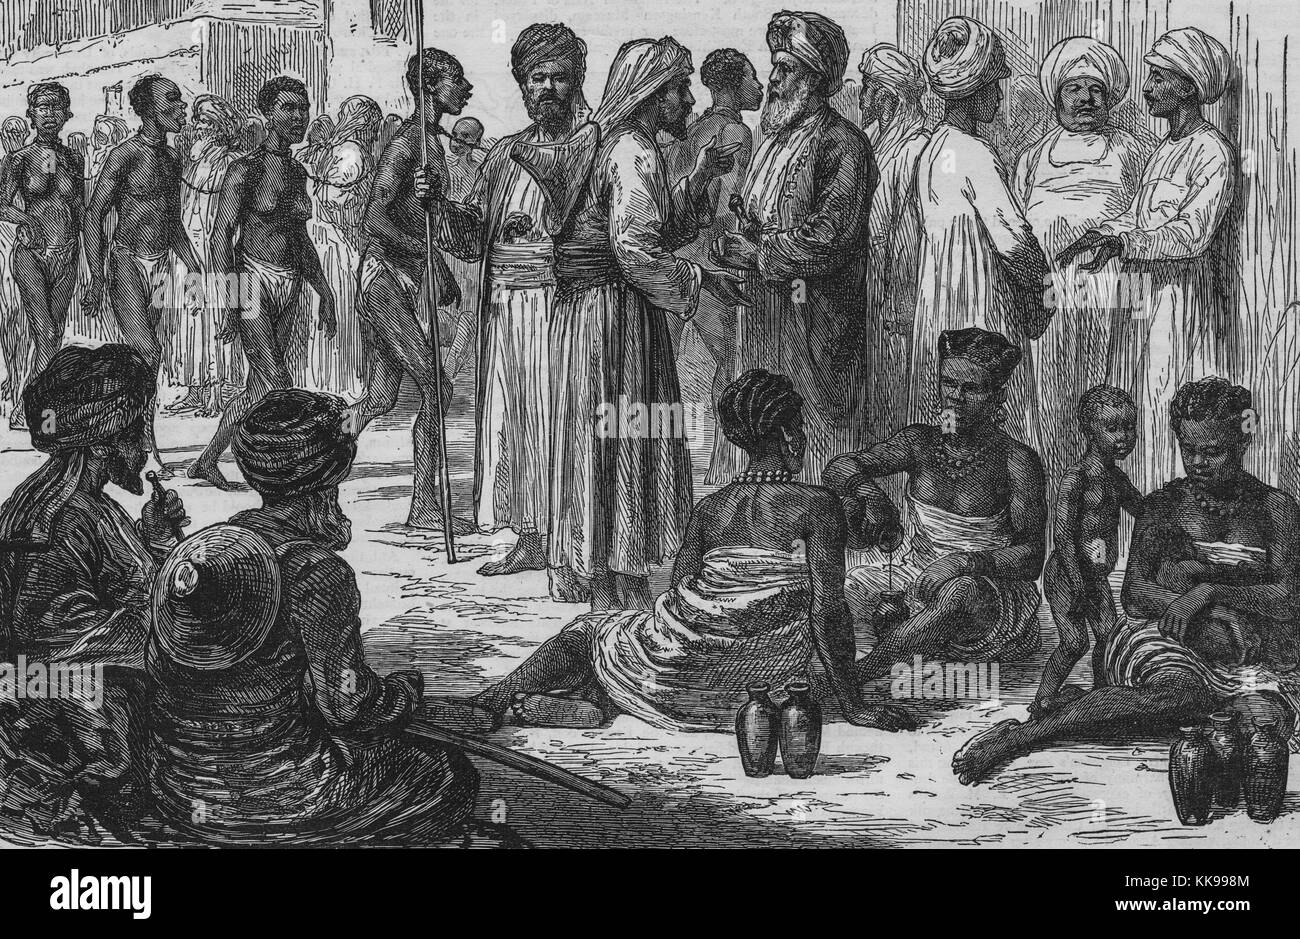 An etching that shows Arab slave dealers and slaves, the slaves are seen in two groups, the group on the left are men and women wearing only breech cloths, the group on the right are three fully clothed women and two small children, the slave dealers all wear long pieces of light colored clothing and turbans, Zanzibar, 1873. From the New York Public Library. Stock Photo